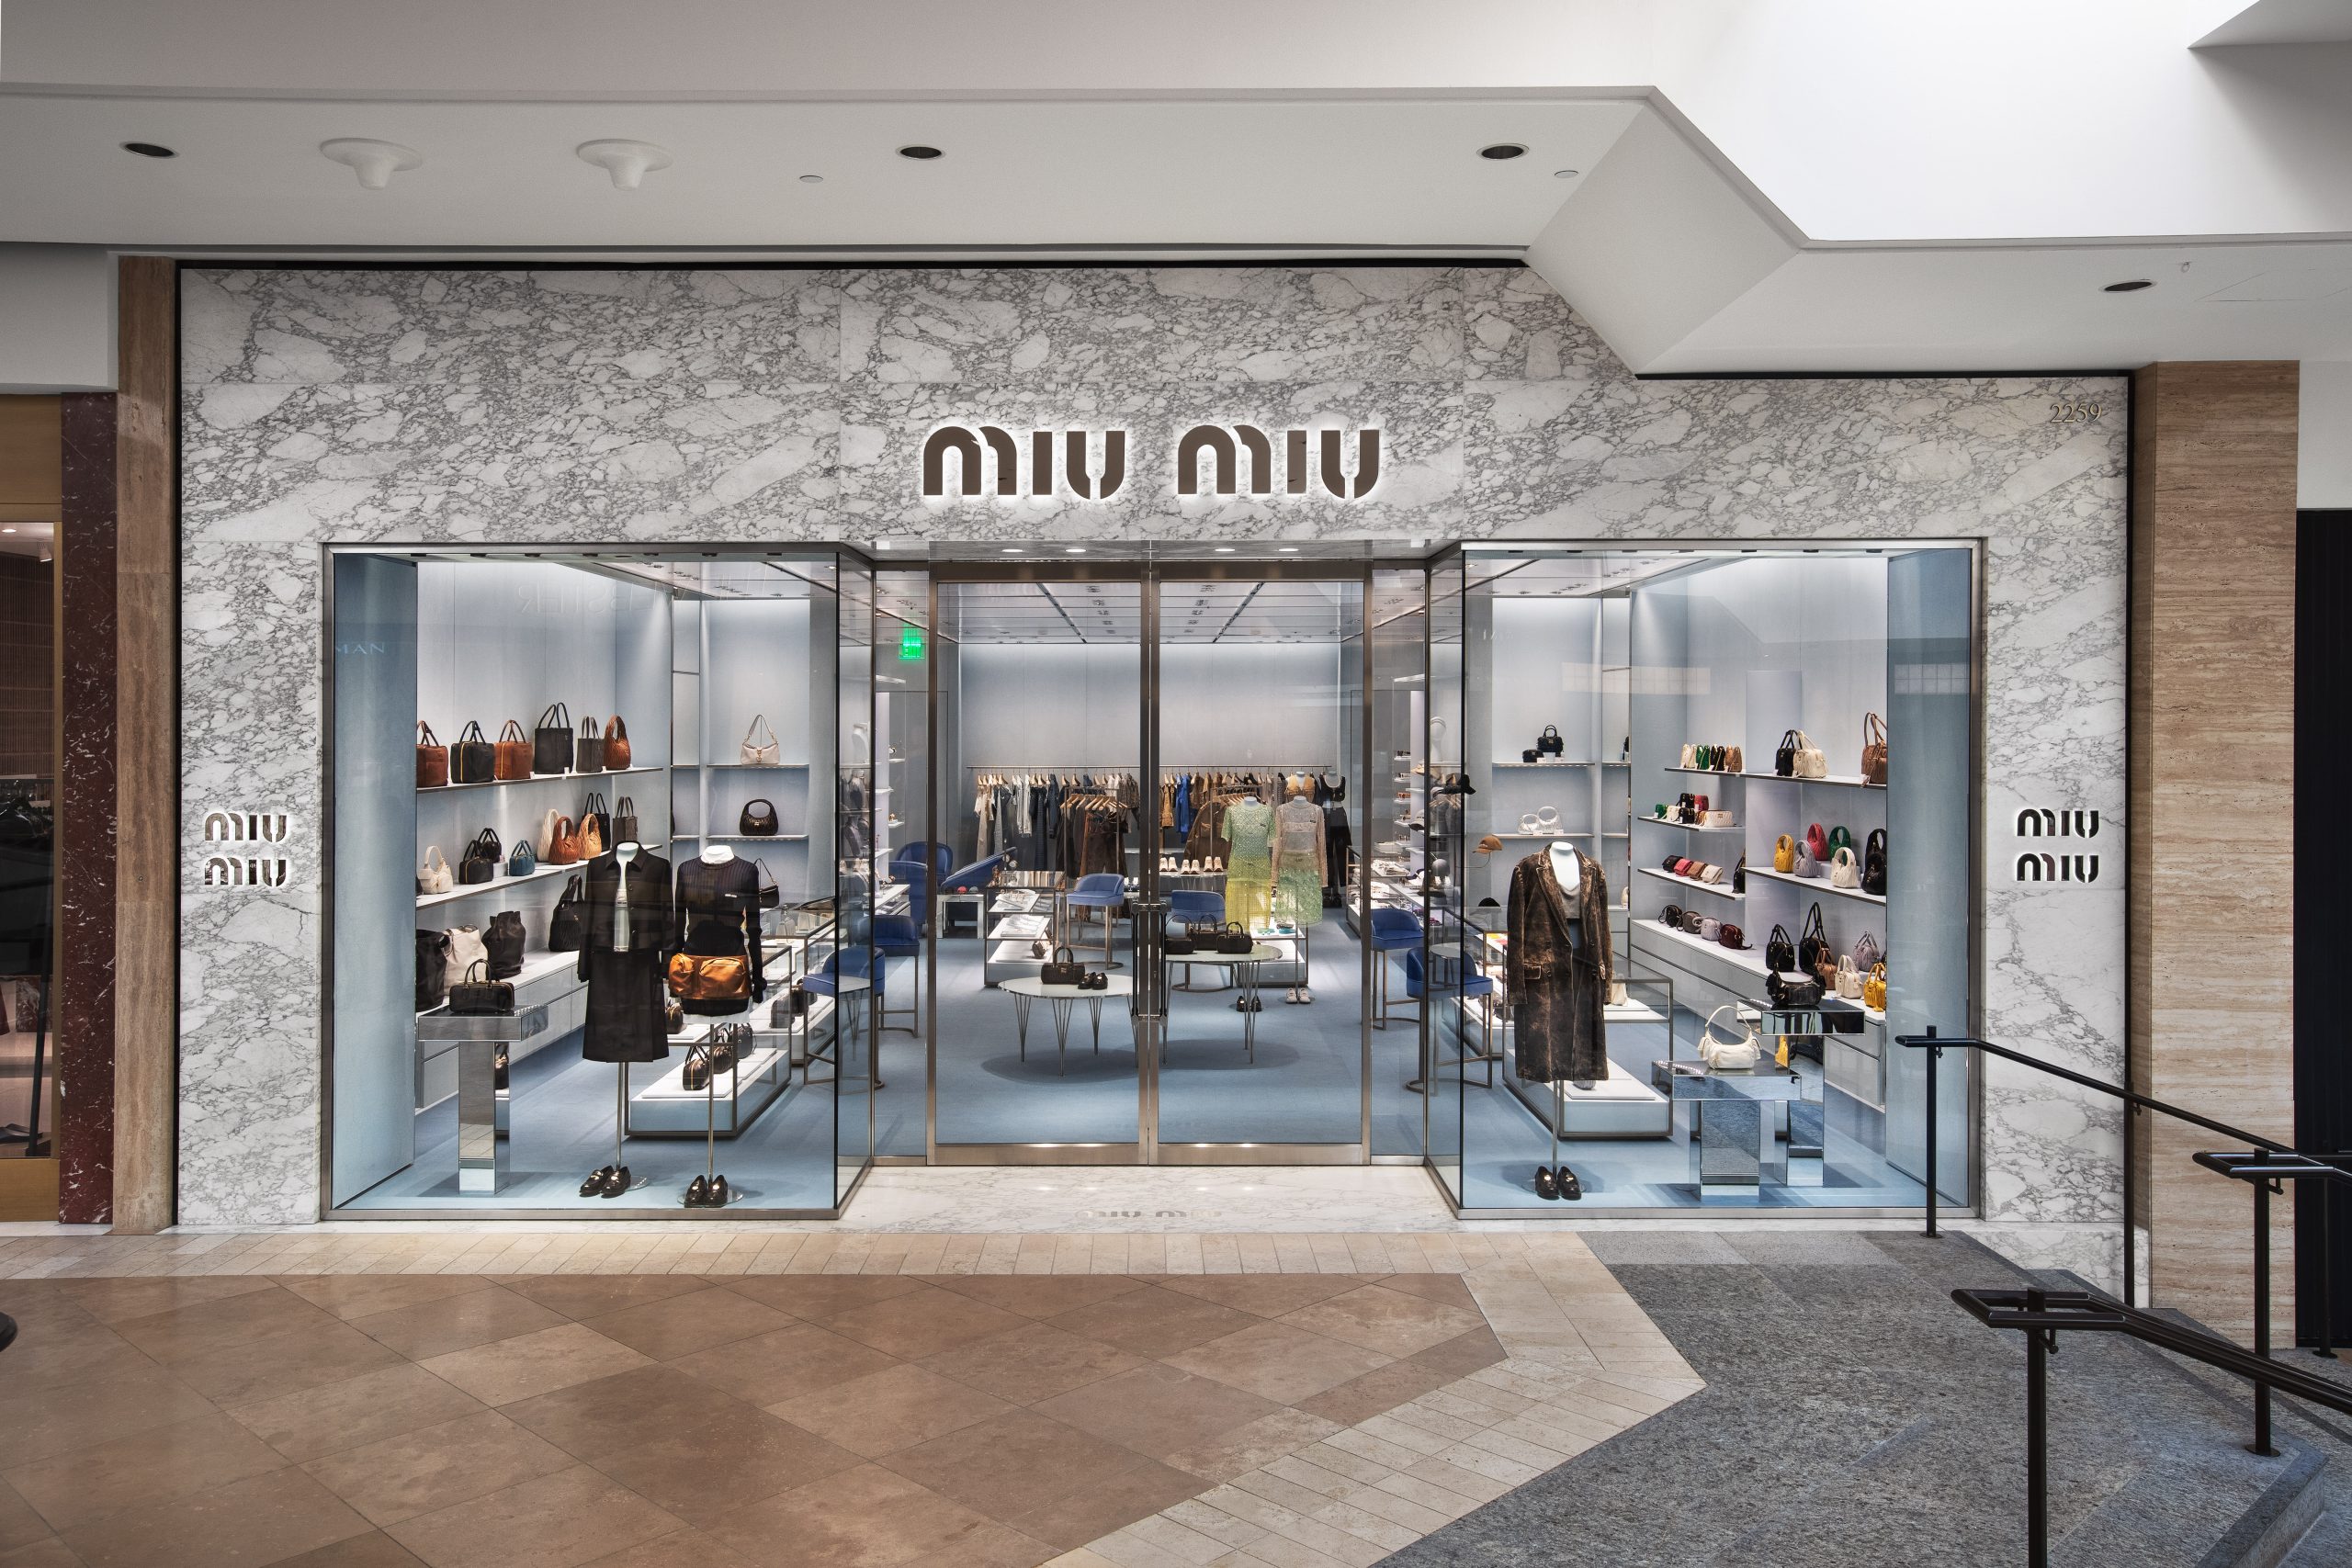 New shoe line launches at South Coast Plaza – Orange County Register